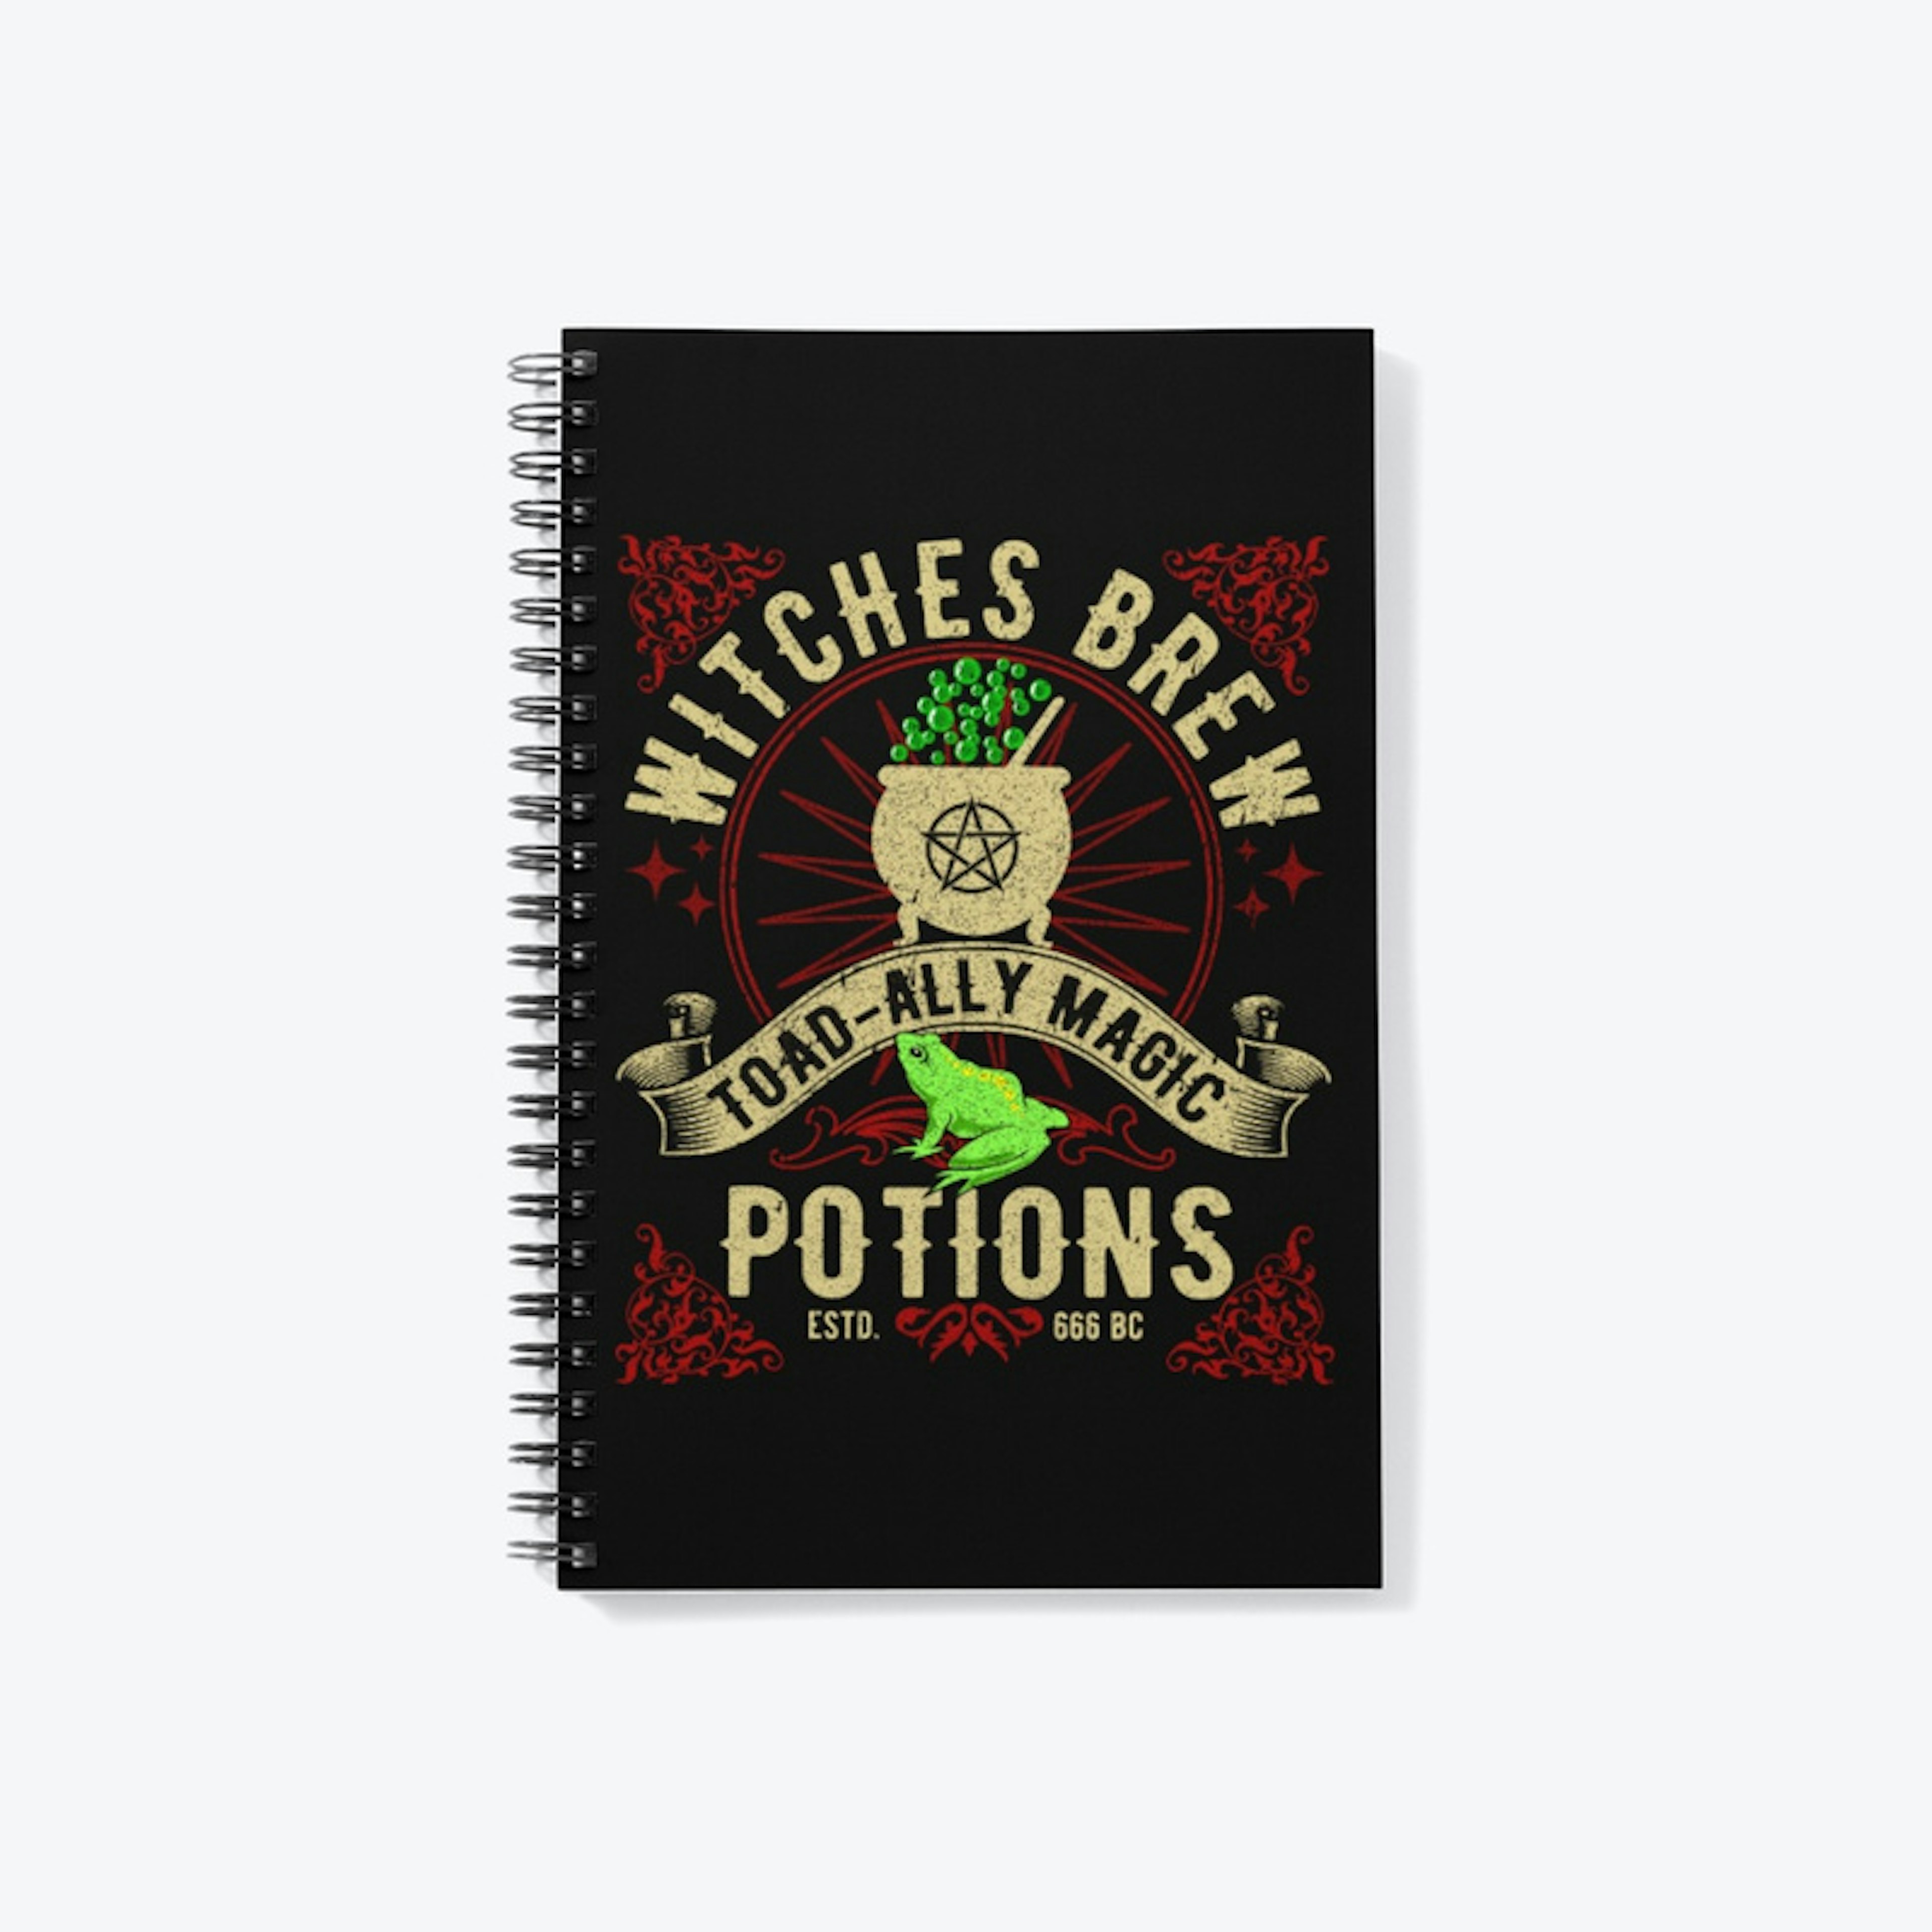 Witches Brew Toad-ally Magic Potions